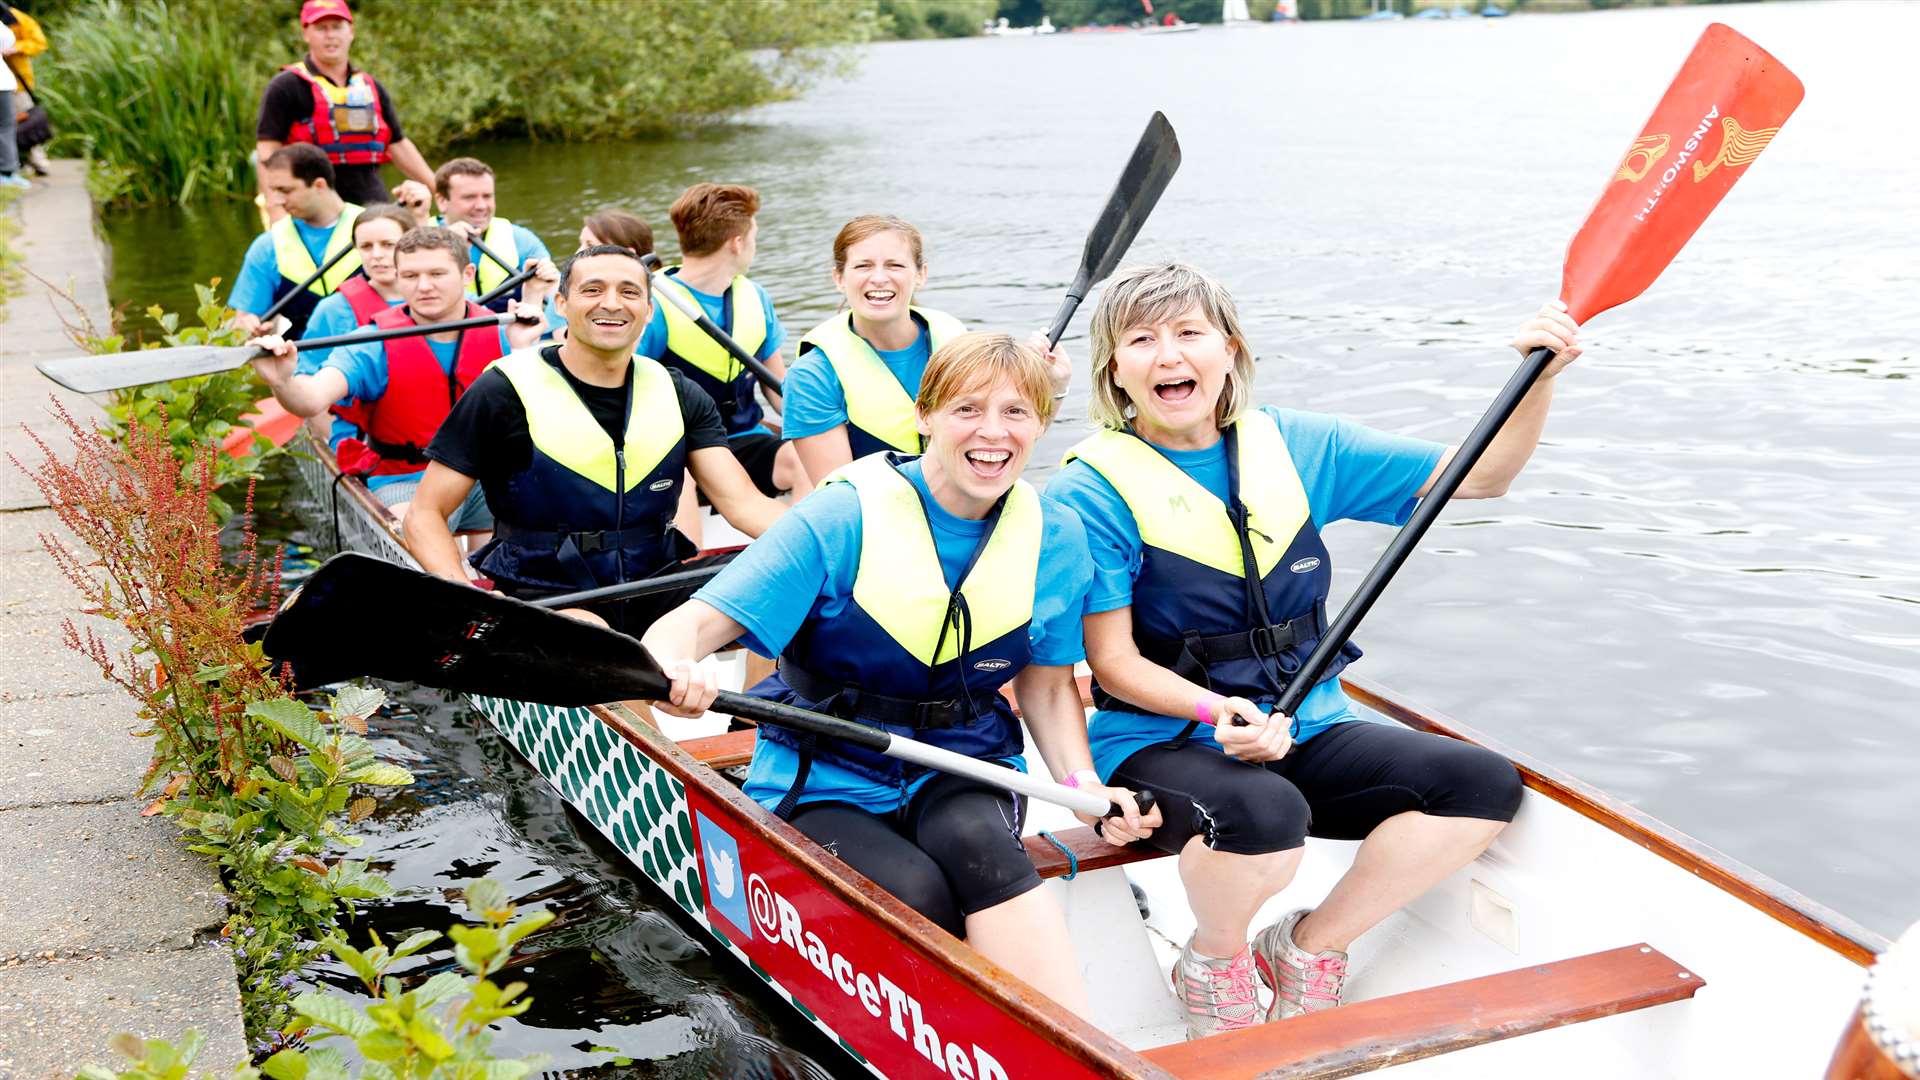 The KM Dragon Boat Race is one of the most popular events organised by the KM Charity Team helping good causes in Kent and Medway to raise much needed funds.